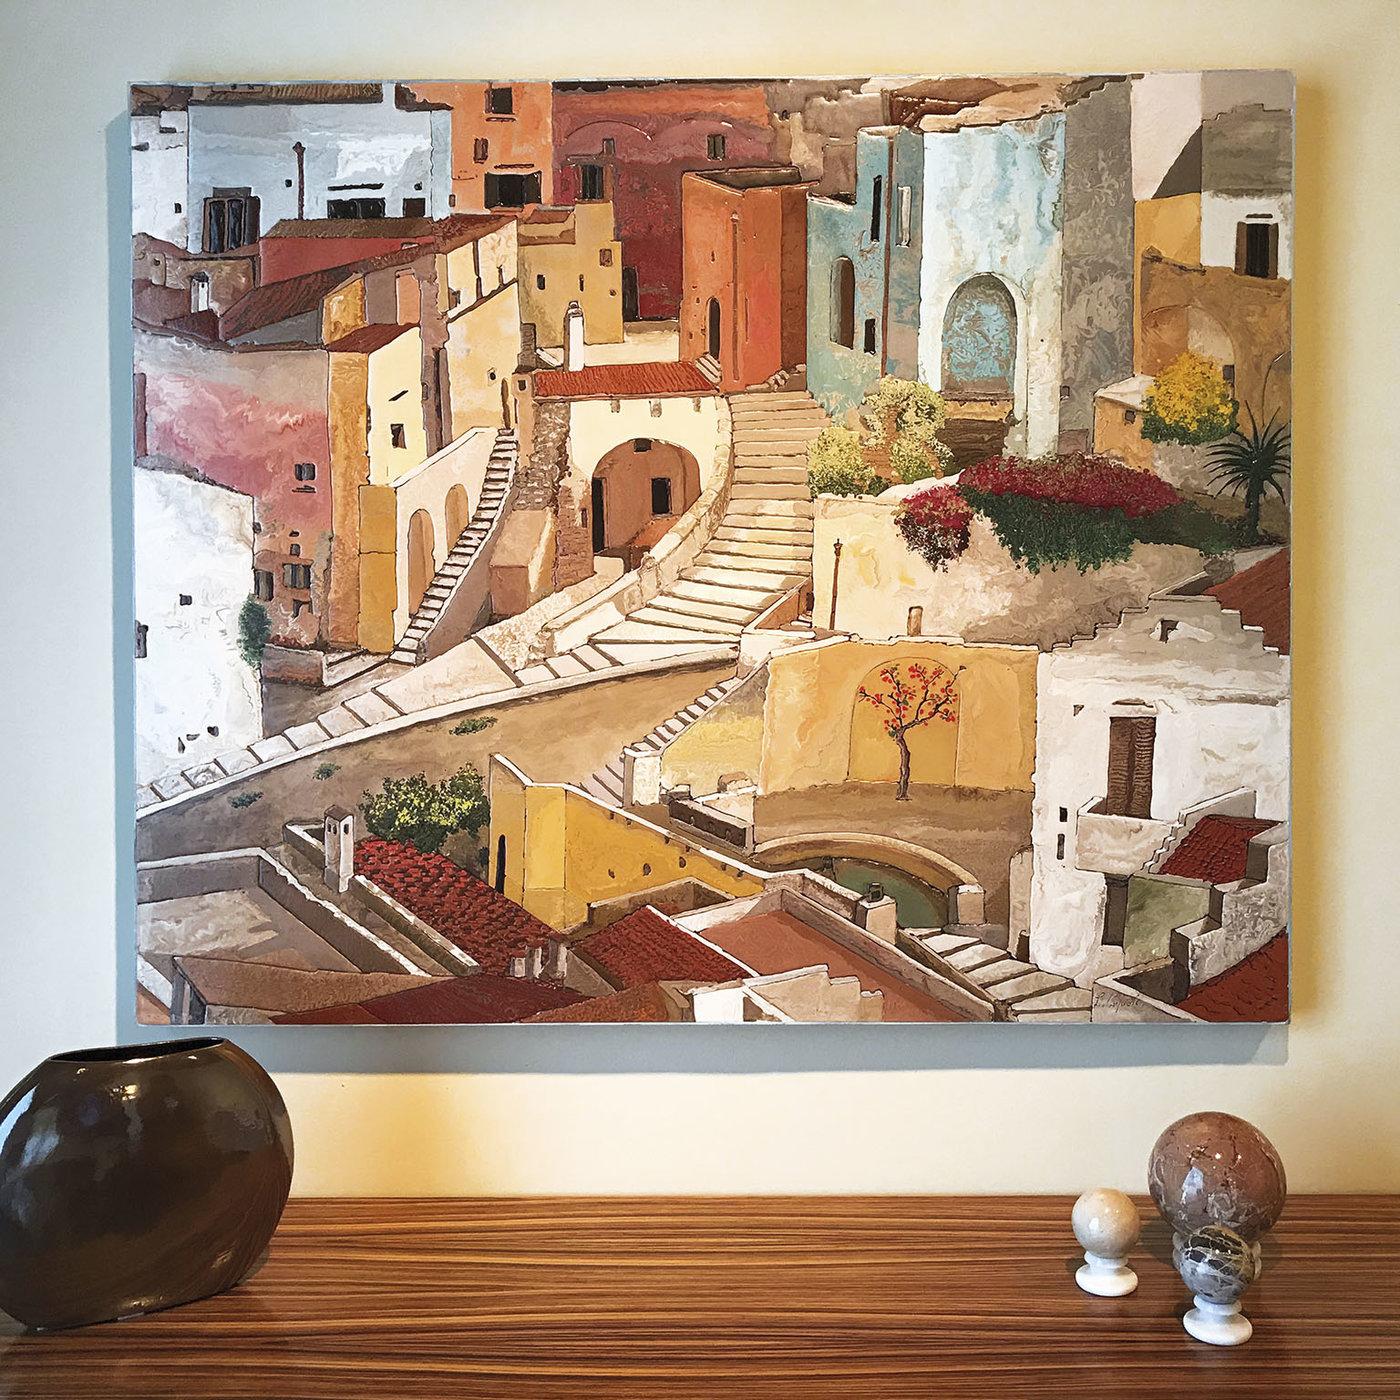 The artist was inspired to paint this wooden art panel after visiting Matera, the 2019 European Capital Of Culture, as a means of sharing his unique emotional response to this southern Italian city. He utilizes a series of reliefs and scagliola